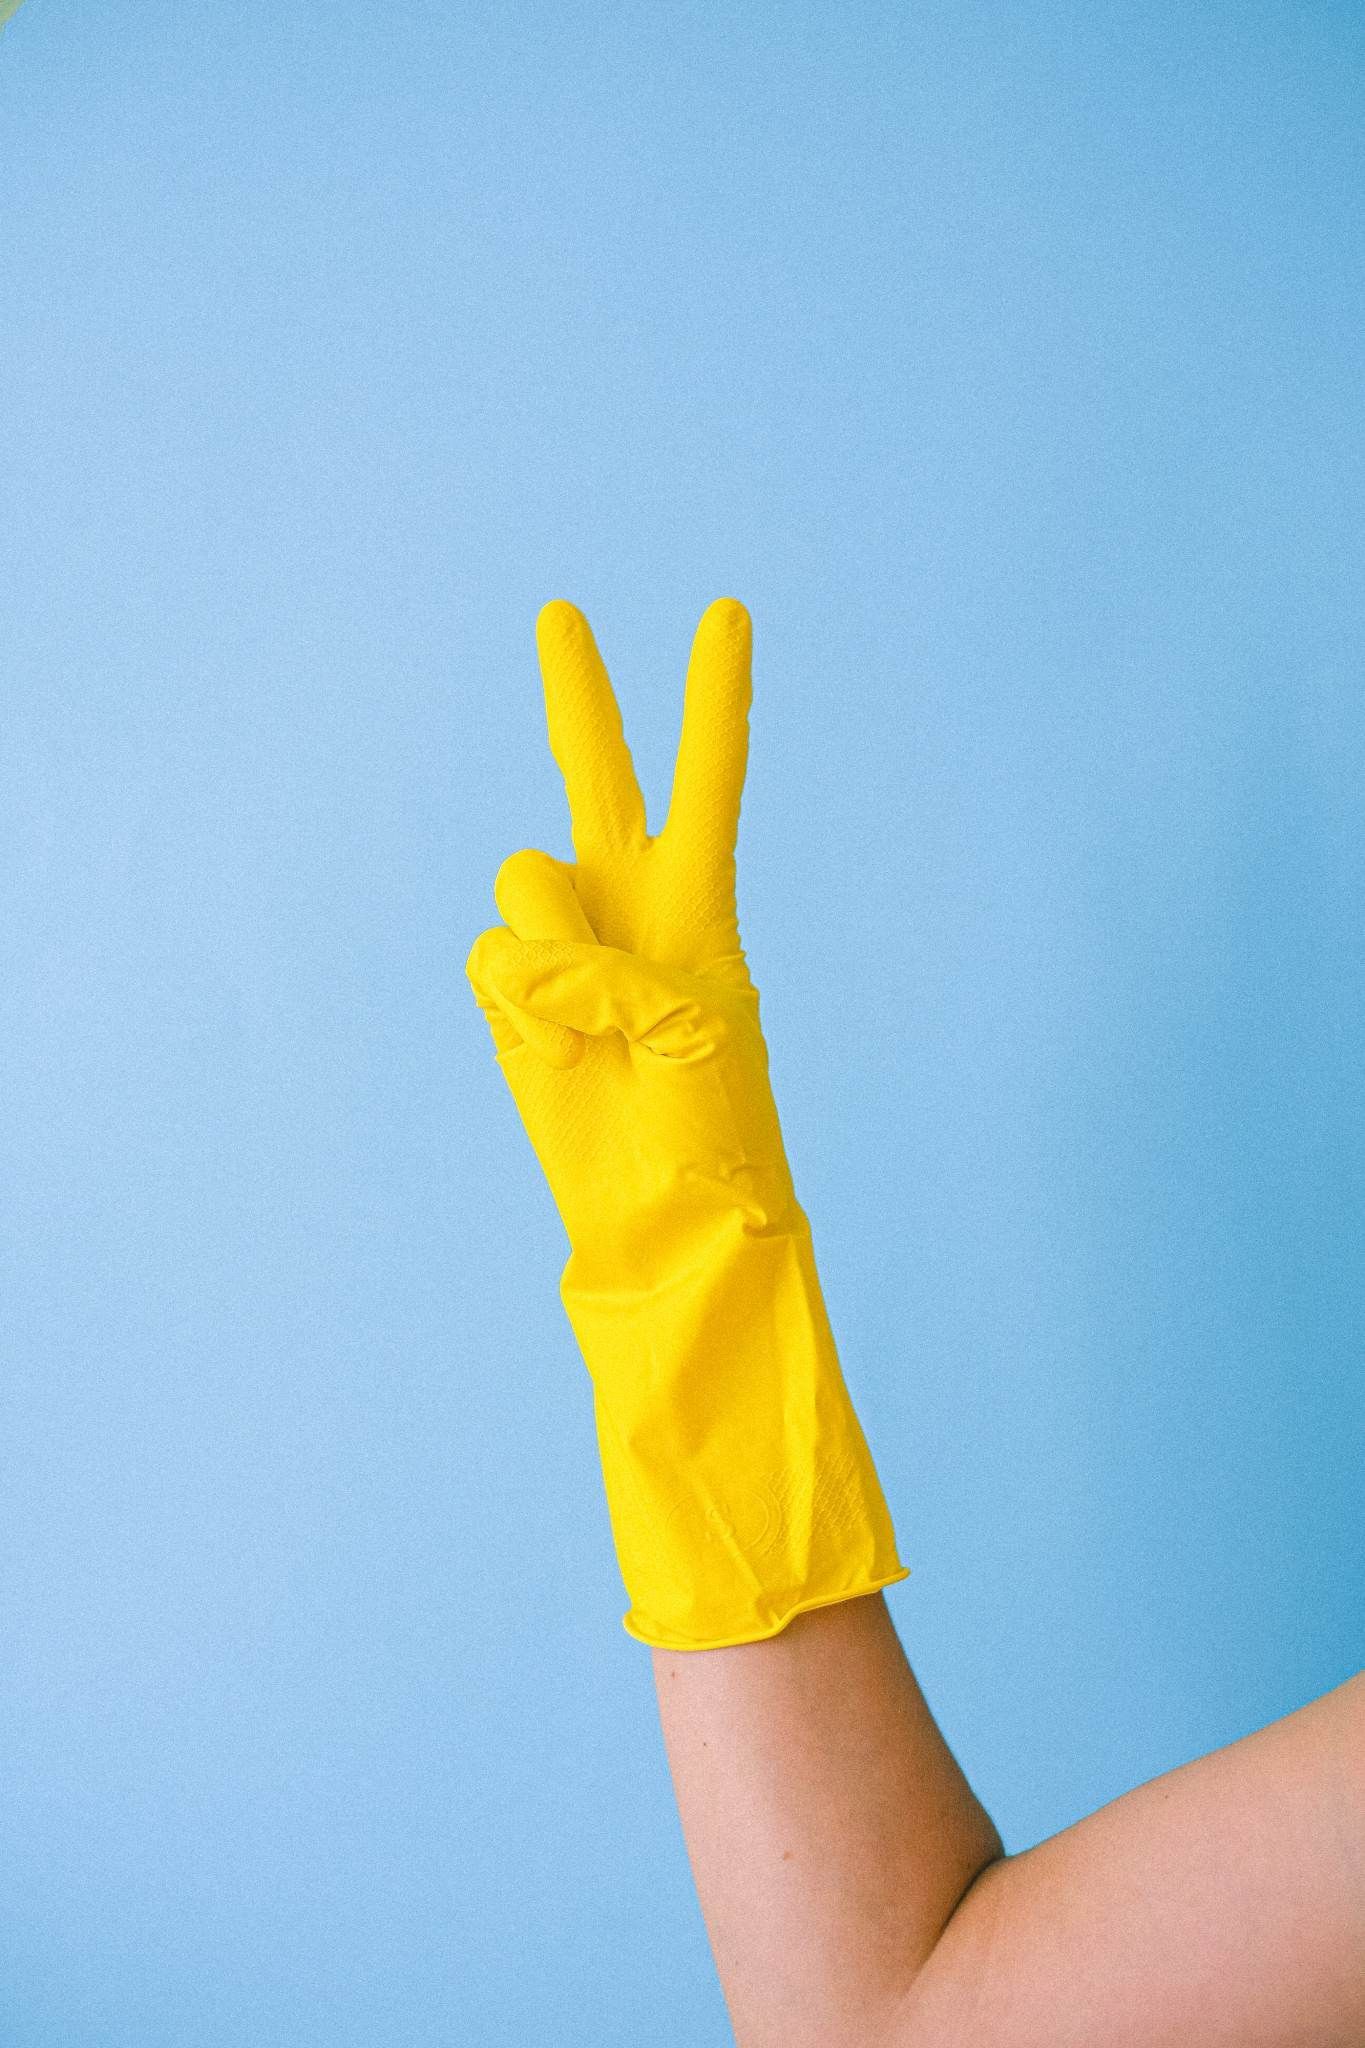 Cleaning services in Newmarket with yellow glove making peace sign blue background